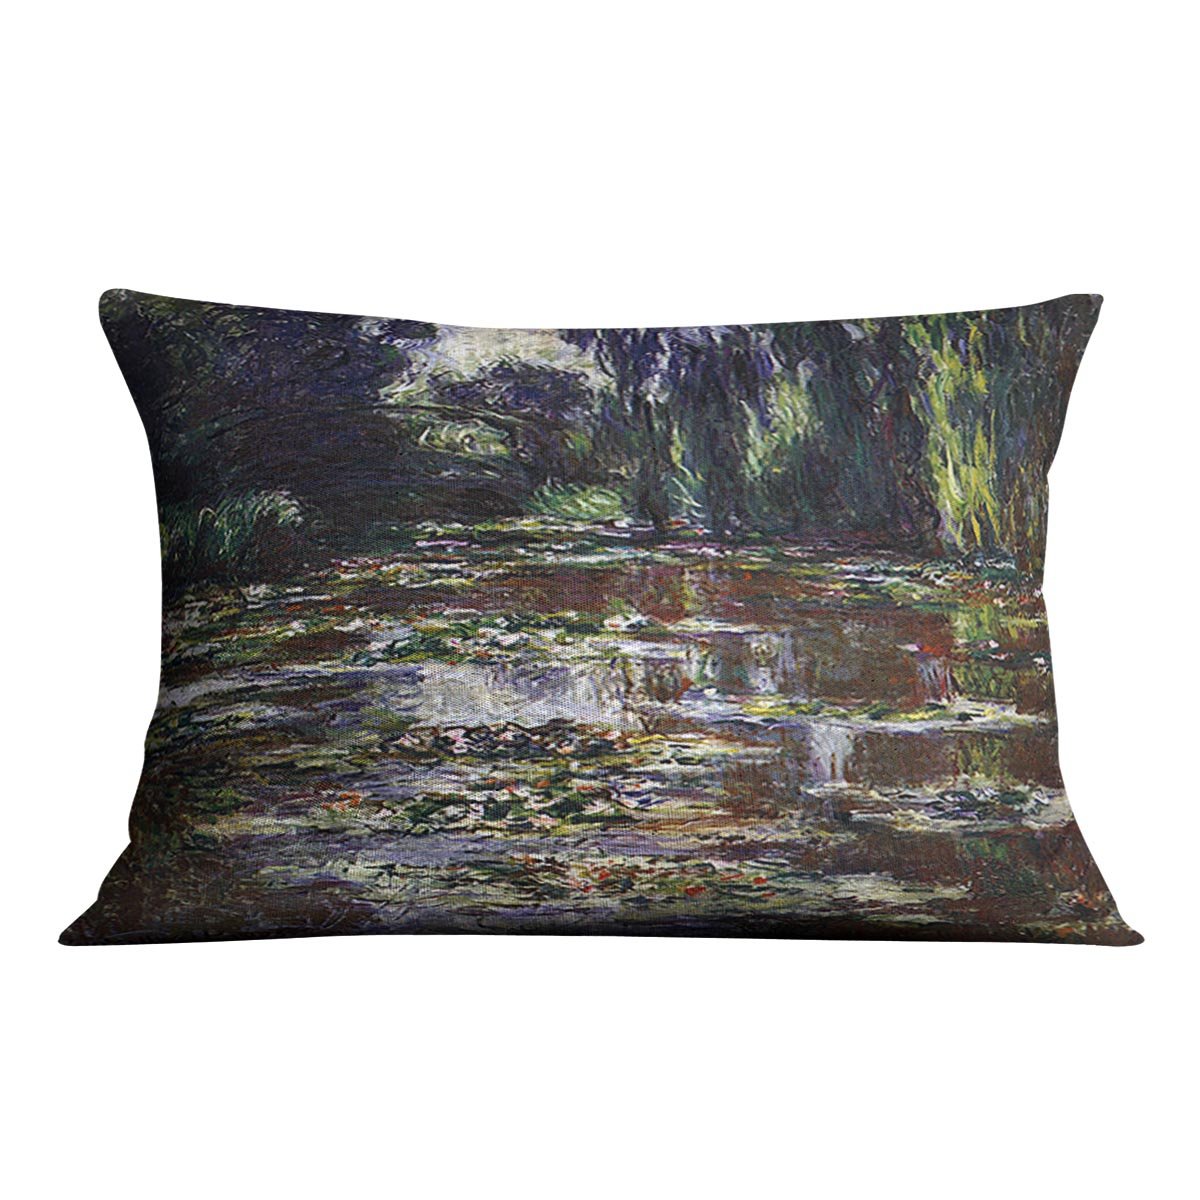 Water lilies water landscape 3 by Monet Throw Pillow